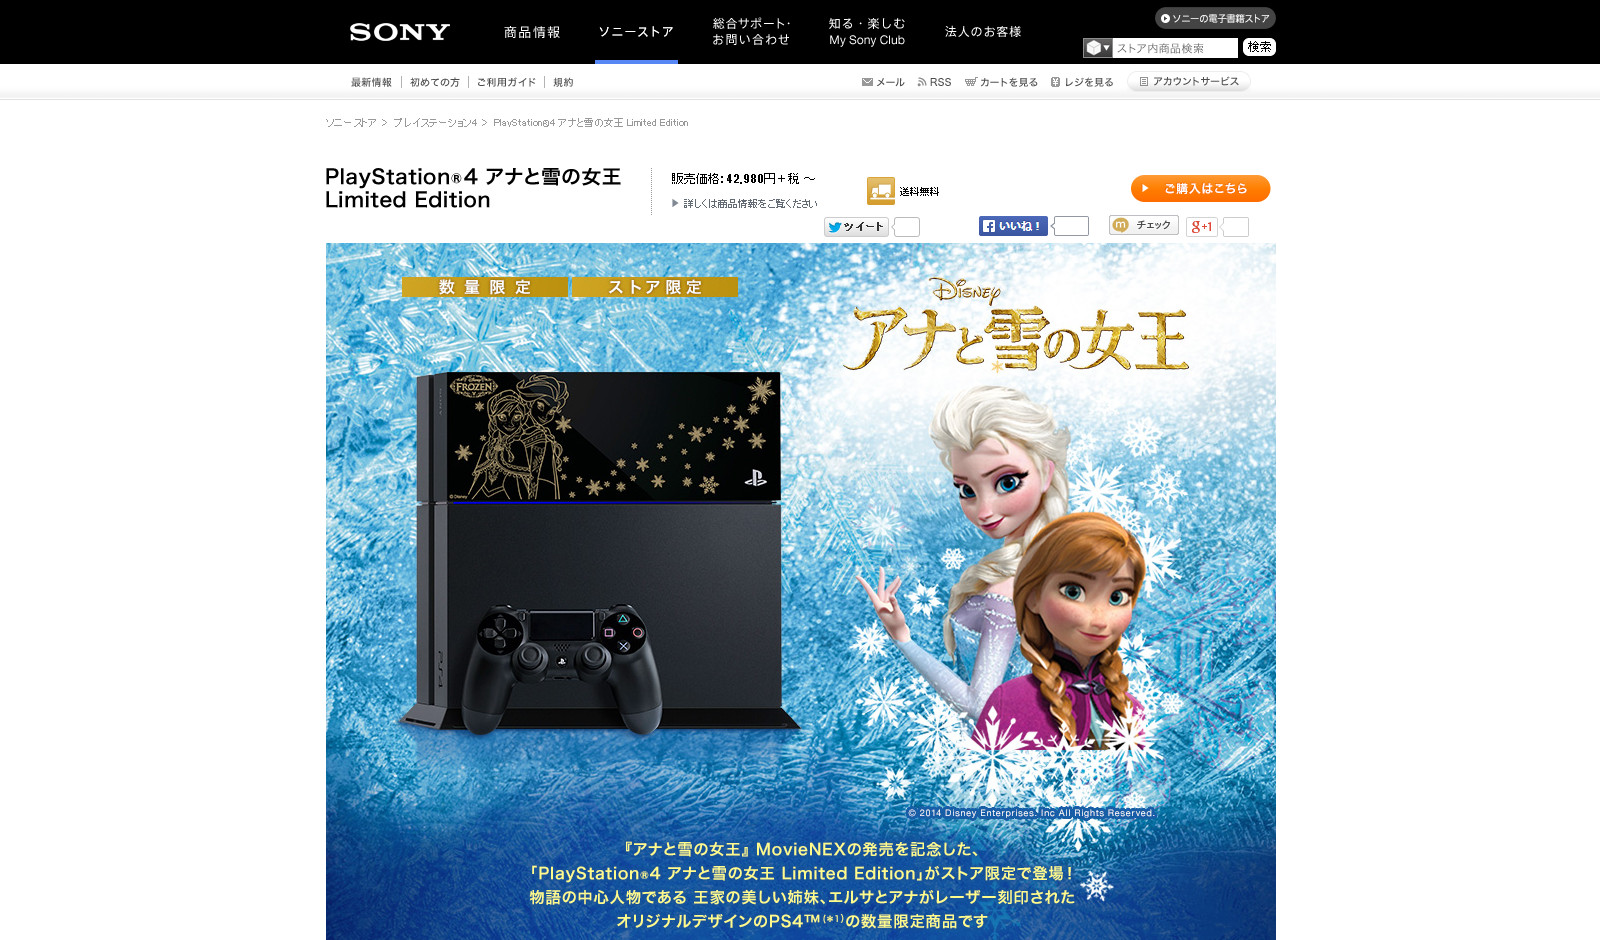 PlayStation 4 アナと雪の女王 Limited Edition｜ソニーの公式通販サイト ソニーストア（Sony Store）